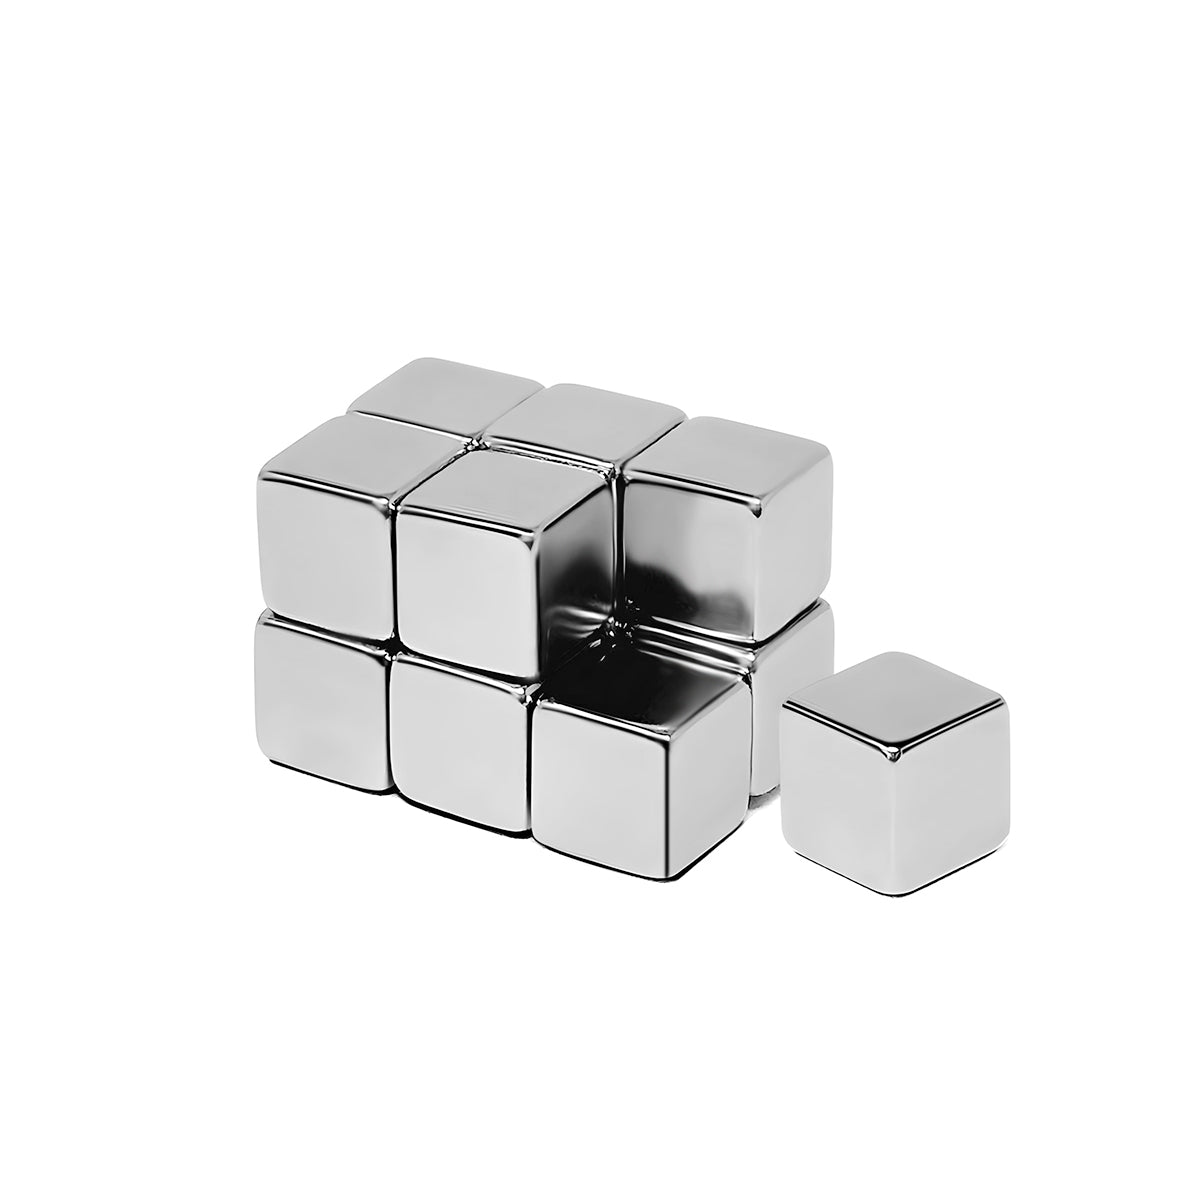 Wrapables Cube Neodymium Magnets, Strong Magnets for Refrigerator, Whiteboards, Crafts, Science Projects Set of 12 (Large)